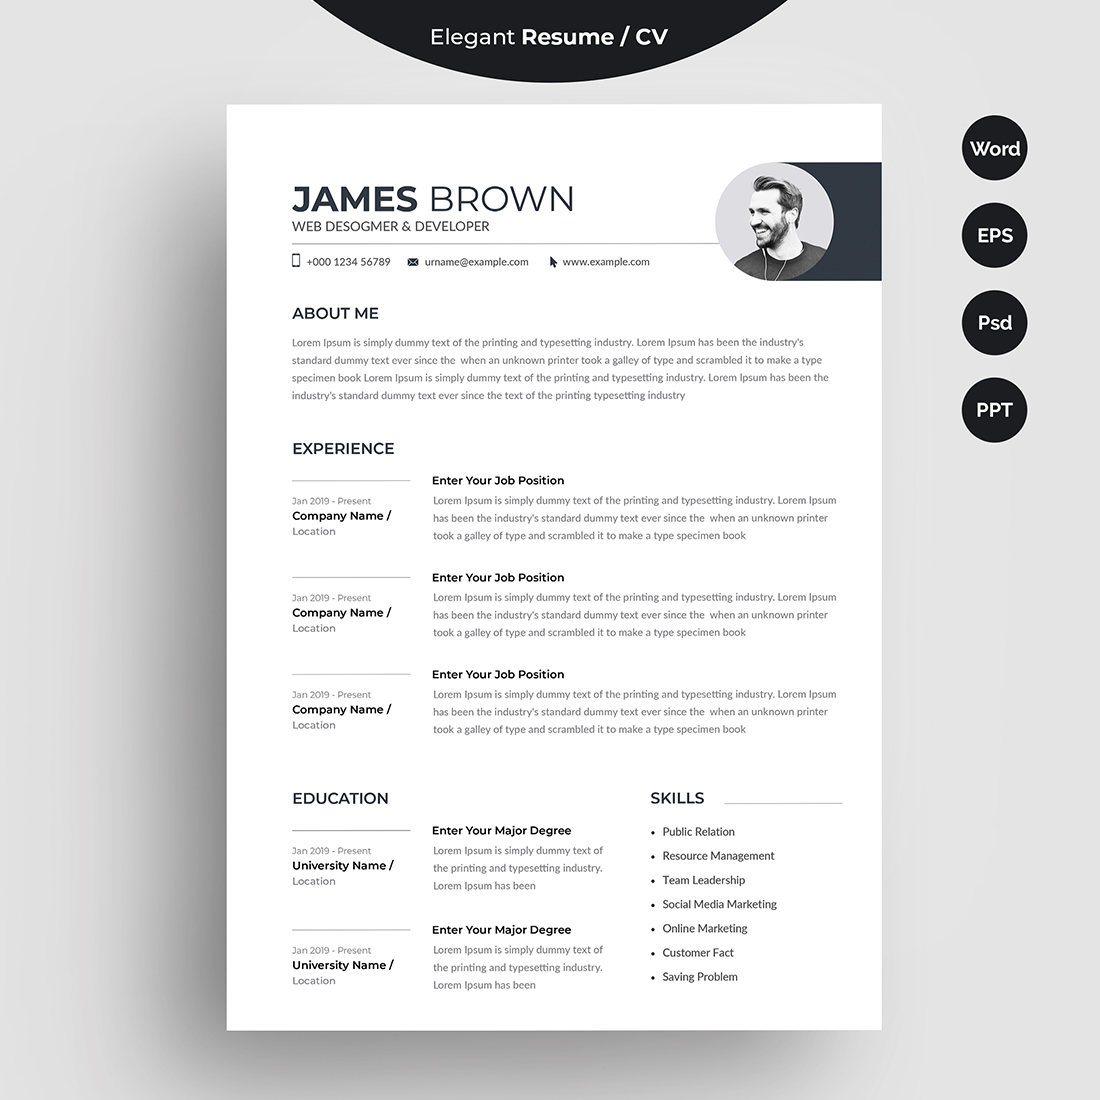 Word Resume CV Template cover image.